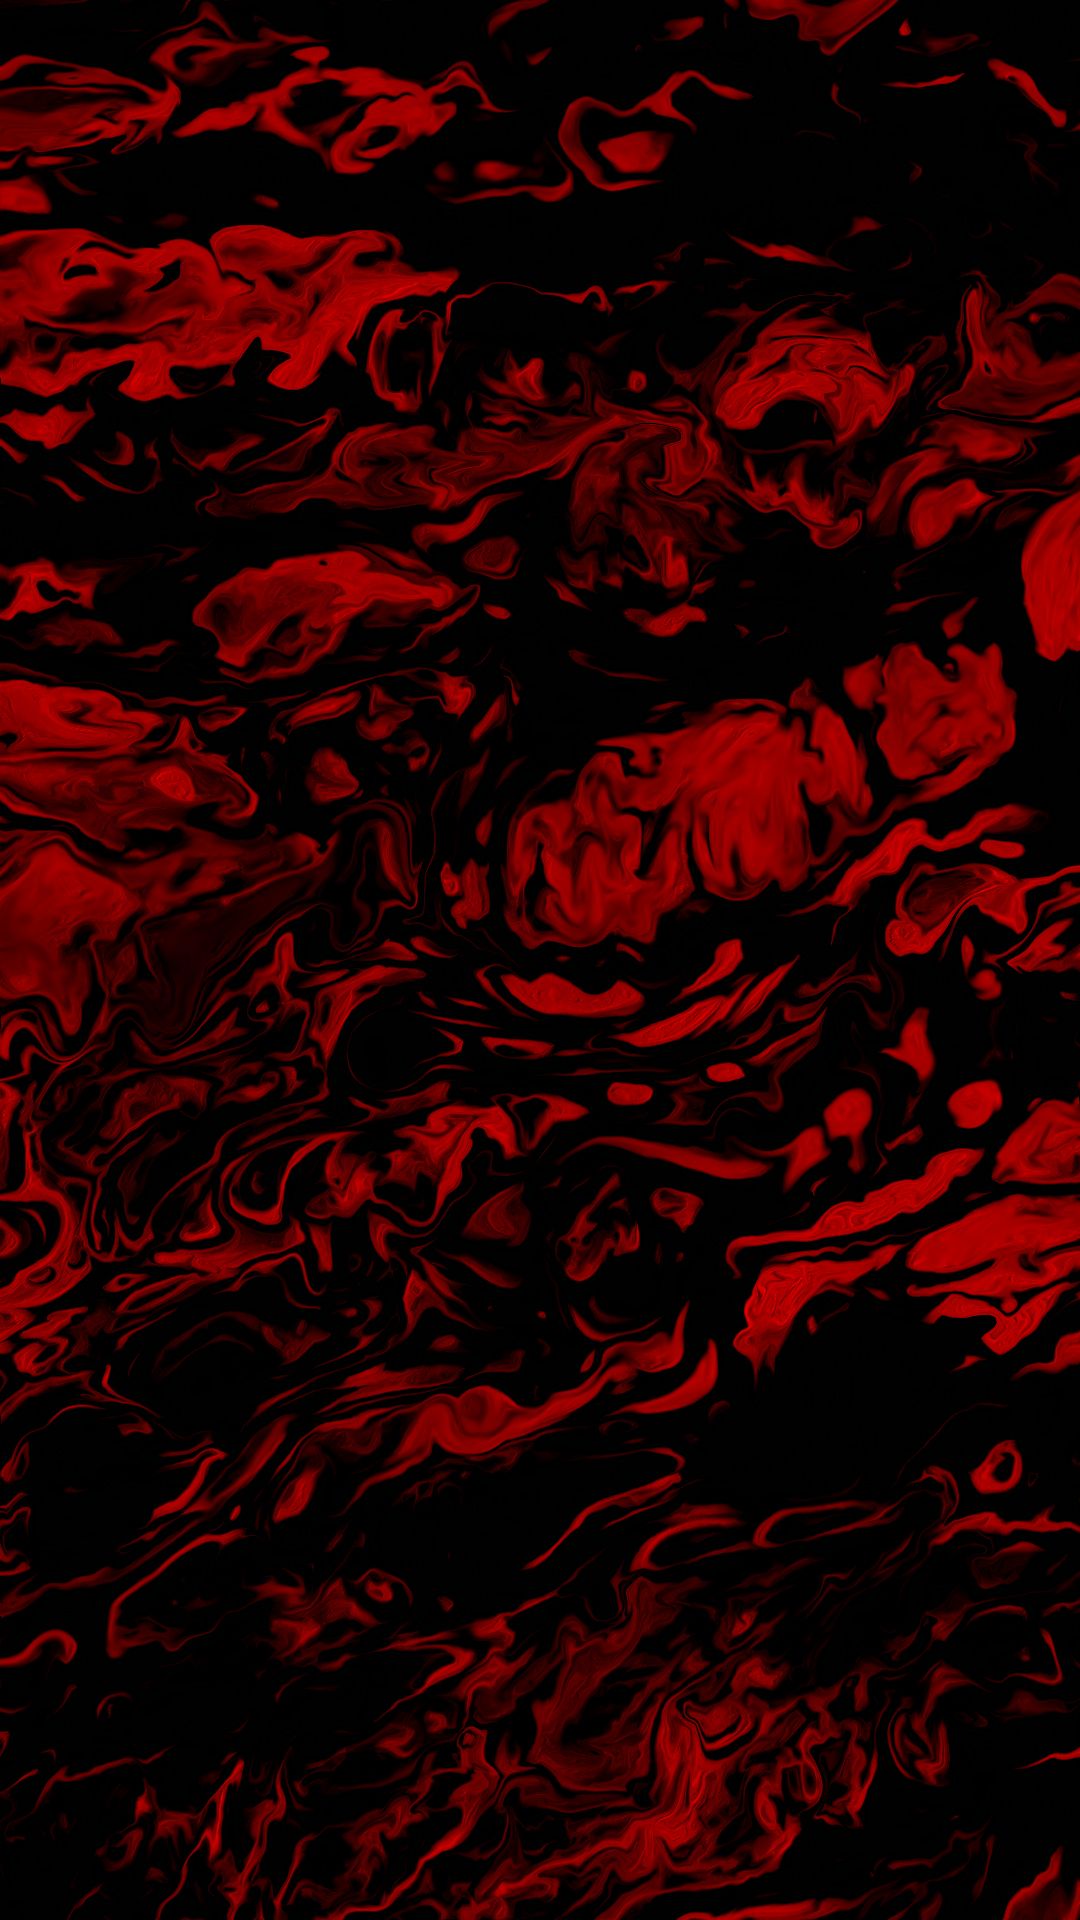 Red Liquid Abstract Art In Wallpaper Pretty